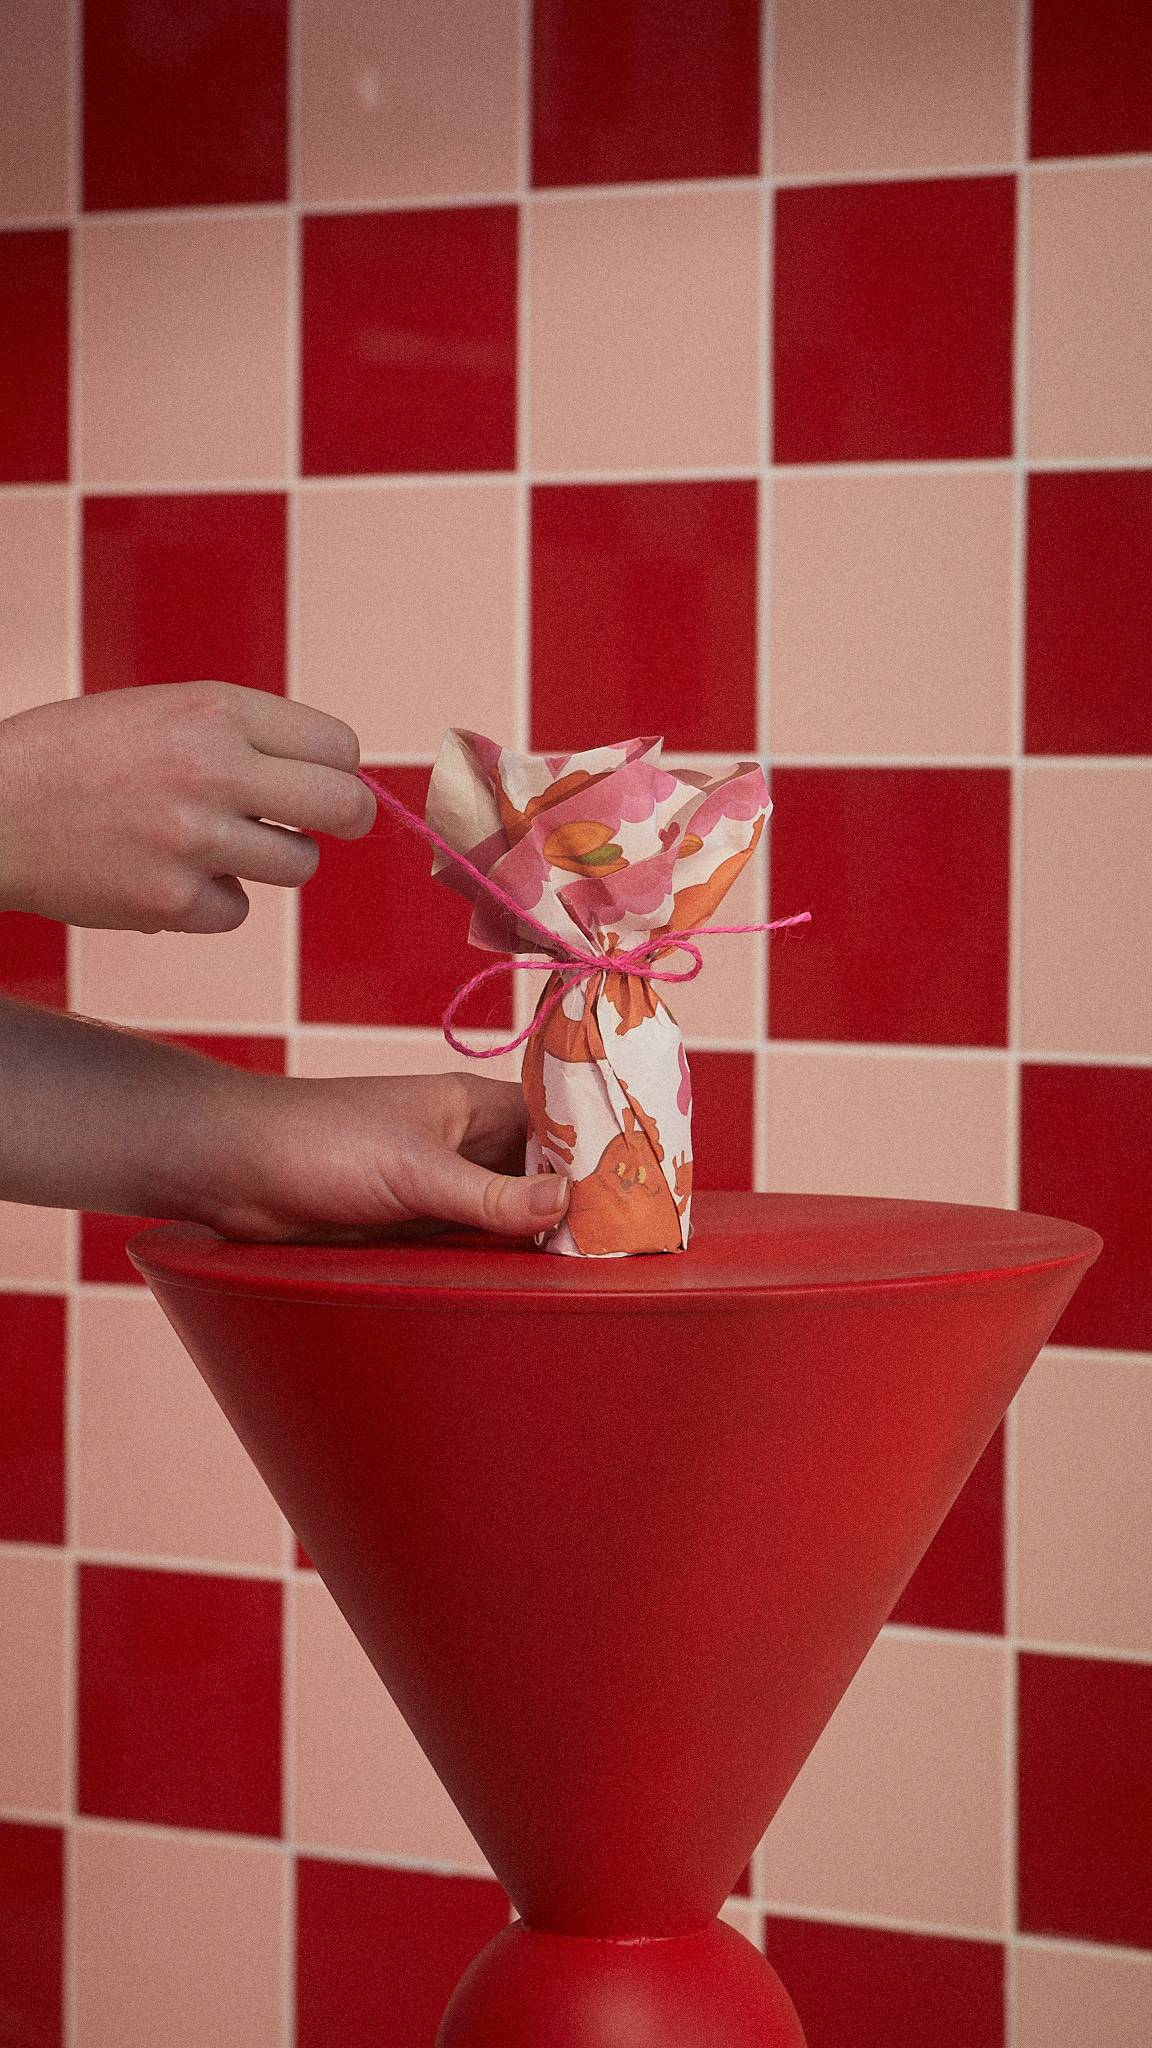 The image shows the Nuts For You gift wrapping around a Lush product, tied with pink string on a red table.